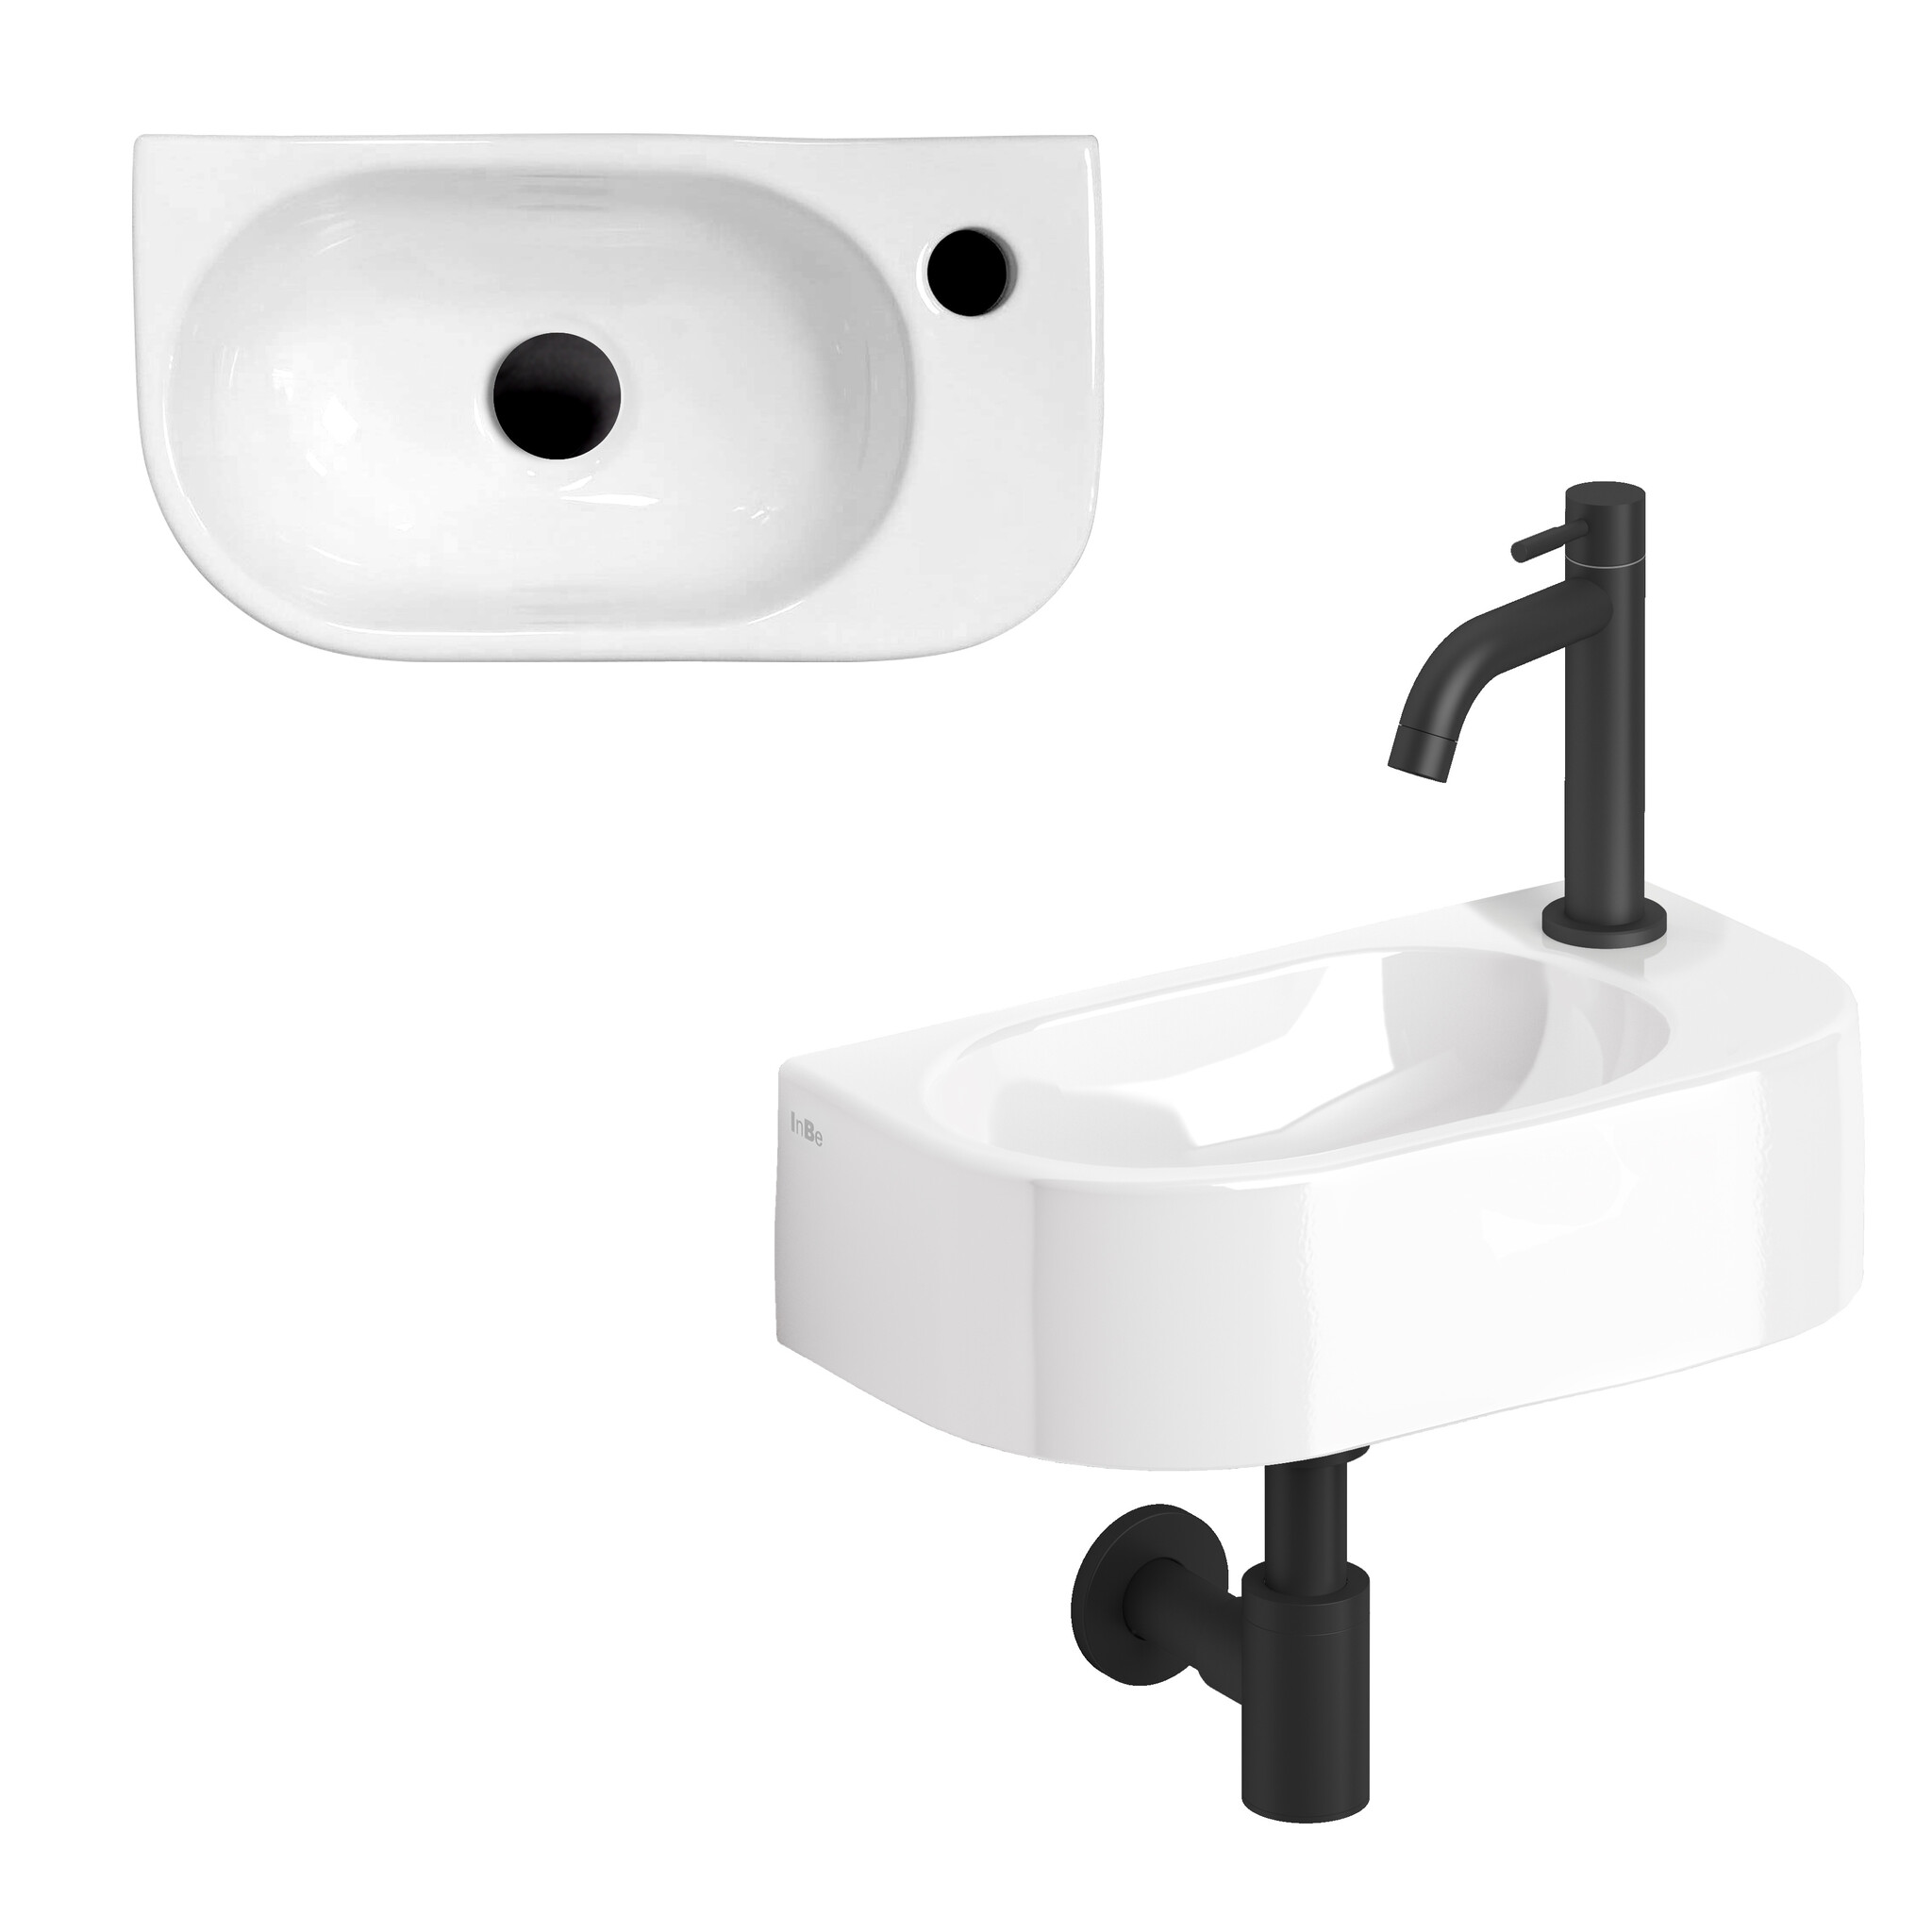 InBe InBe hand basin set 7, with hand basin, tap, drain and trap, white ceramics and matt black